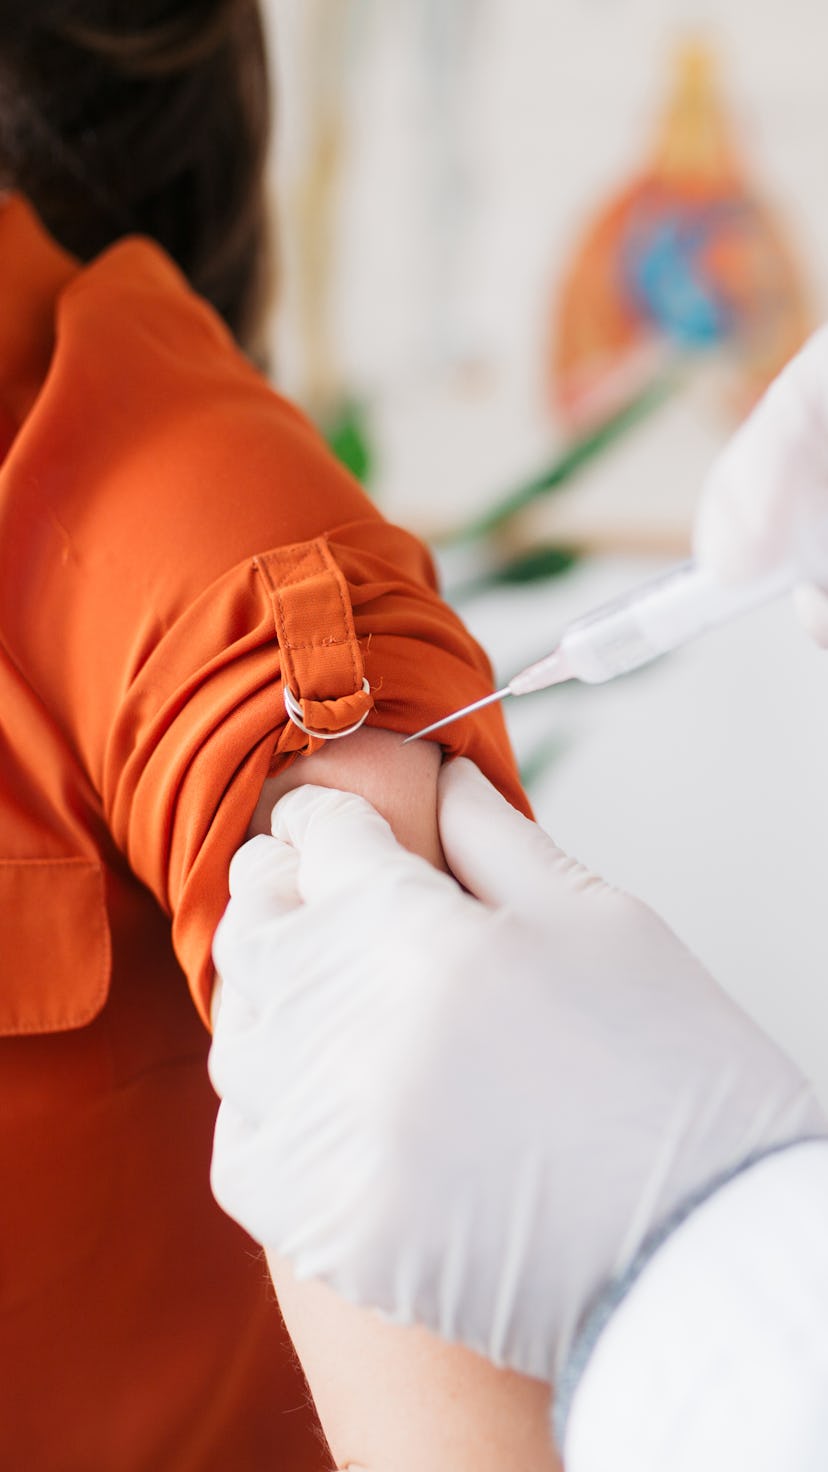 A woman wearing an orange shirt receives the COVID vaccine.